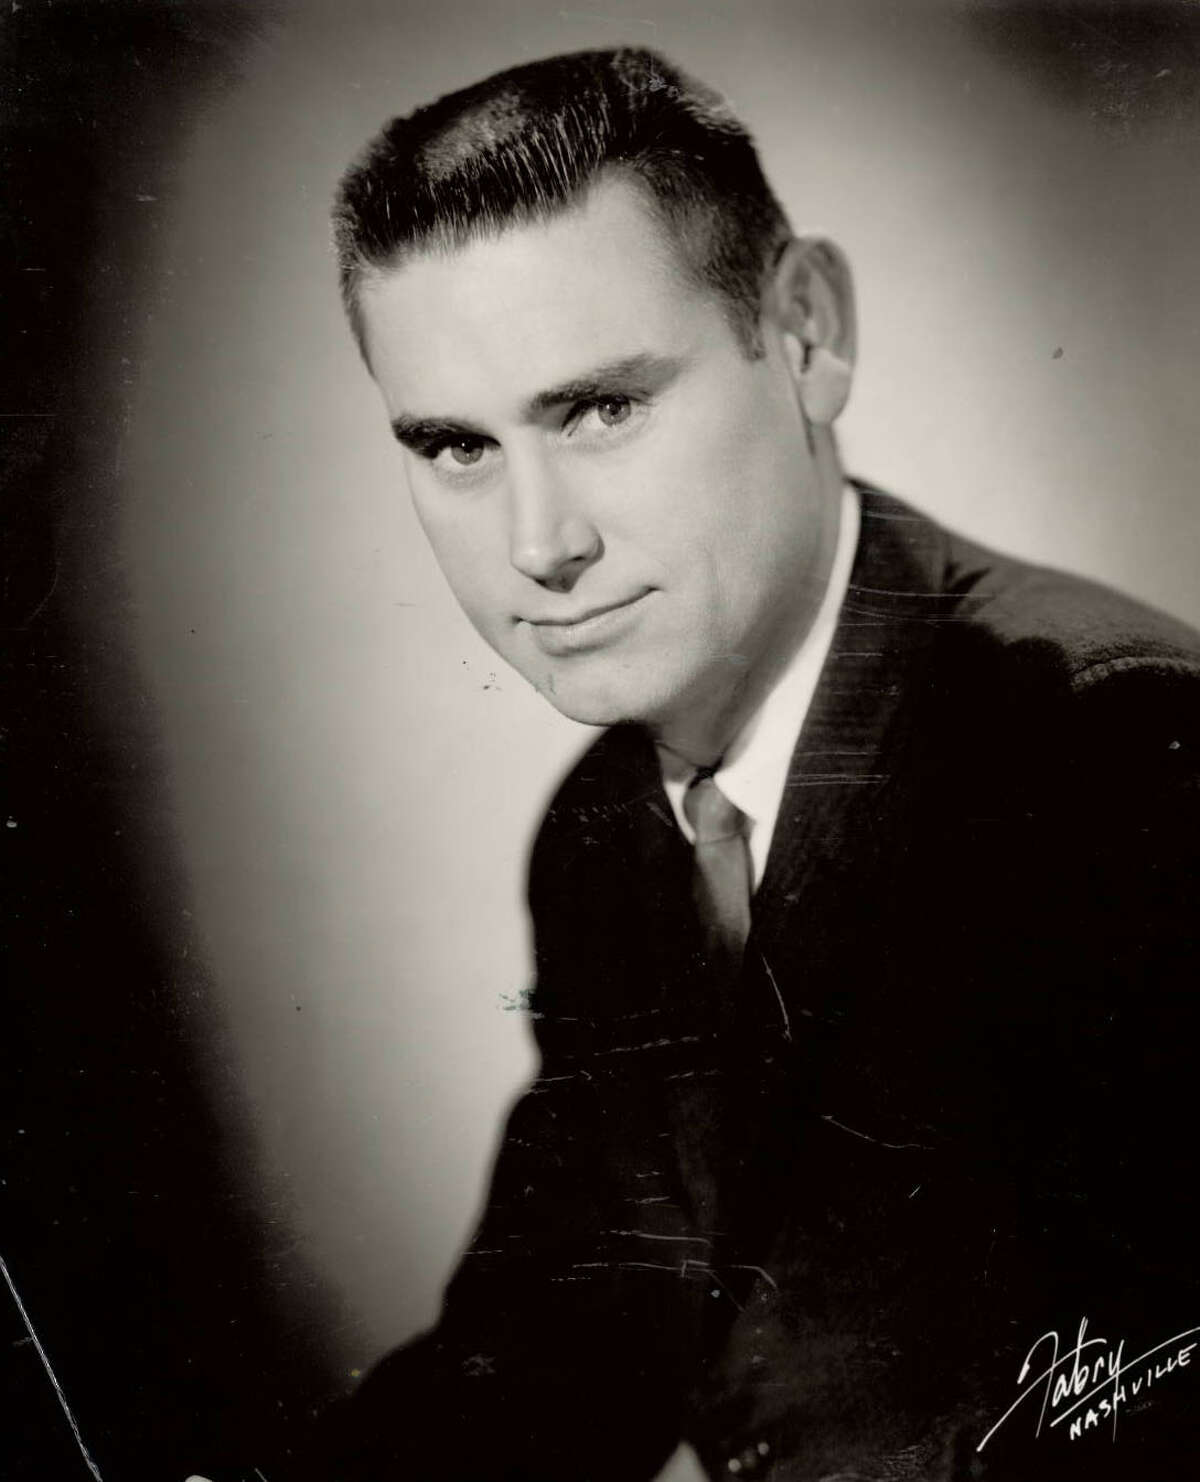 Press photo of George Jones from United Artists. Photo: The Beaumont Enterprise archives.